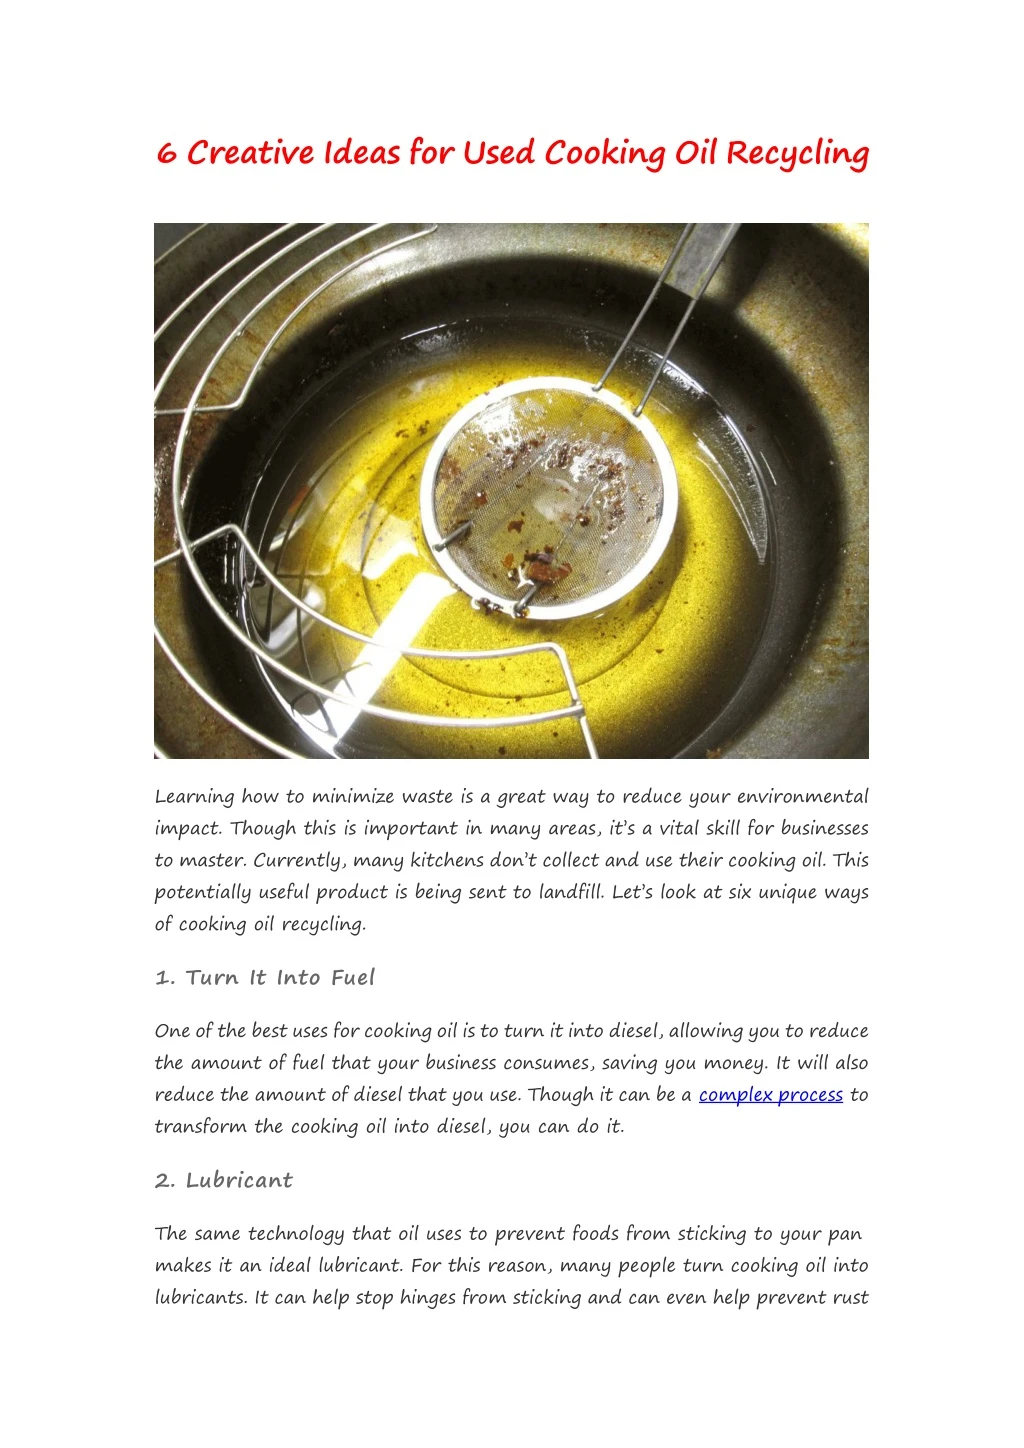 6 creative ideas for used cooking oil recycling